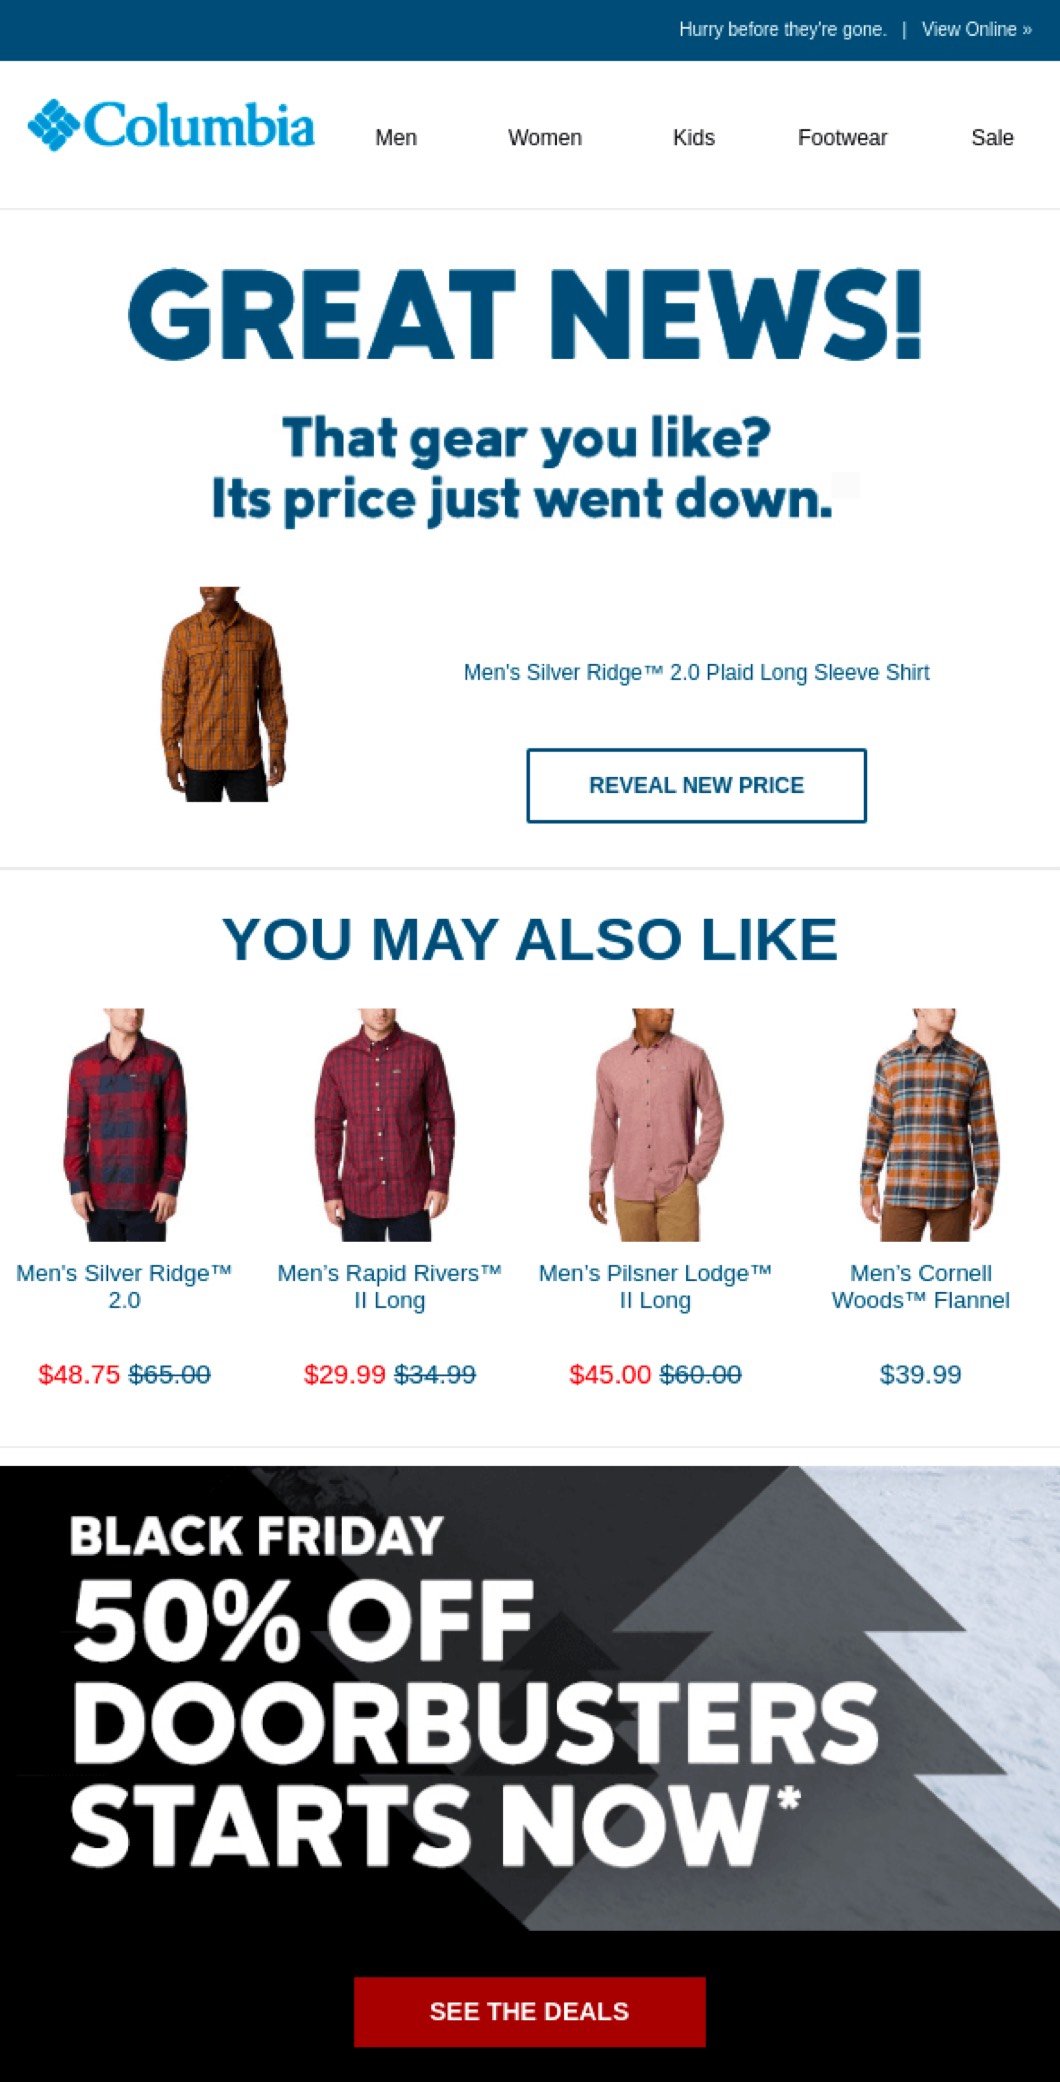 Columbia Black Friday email example clothes